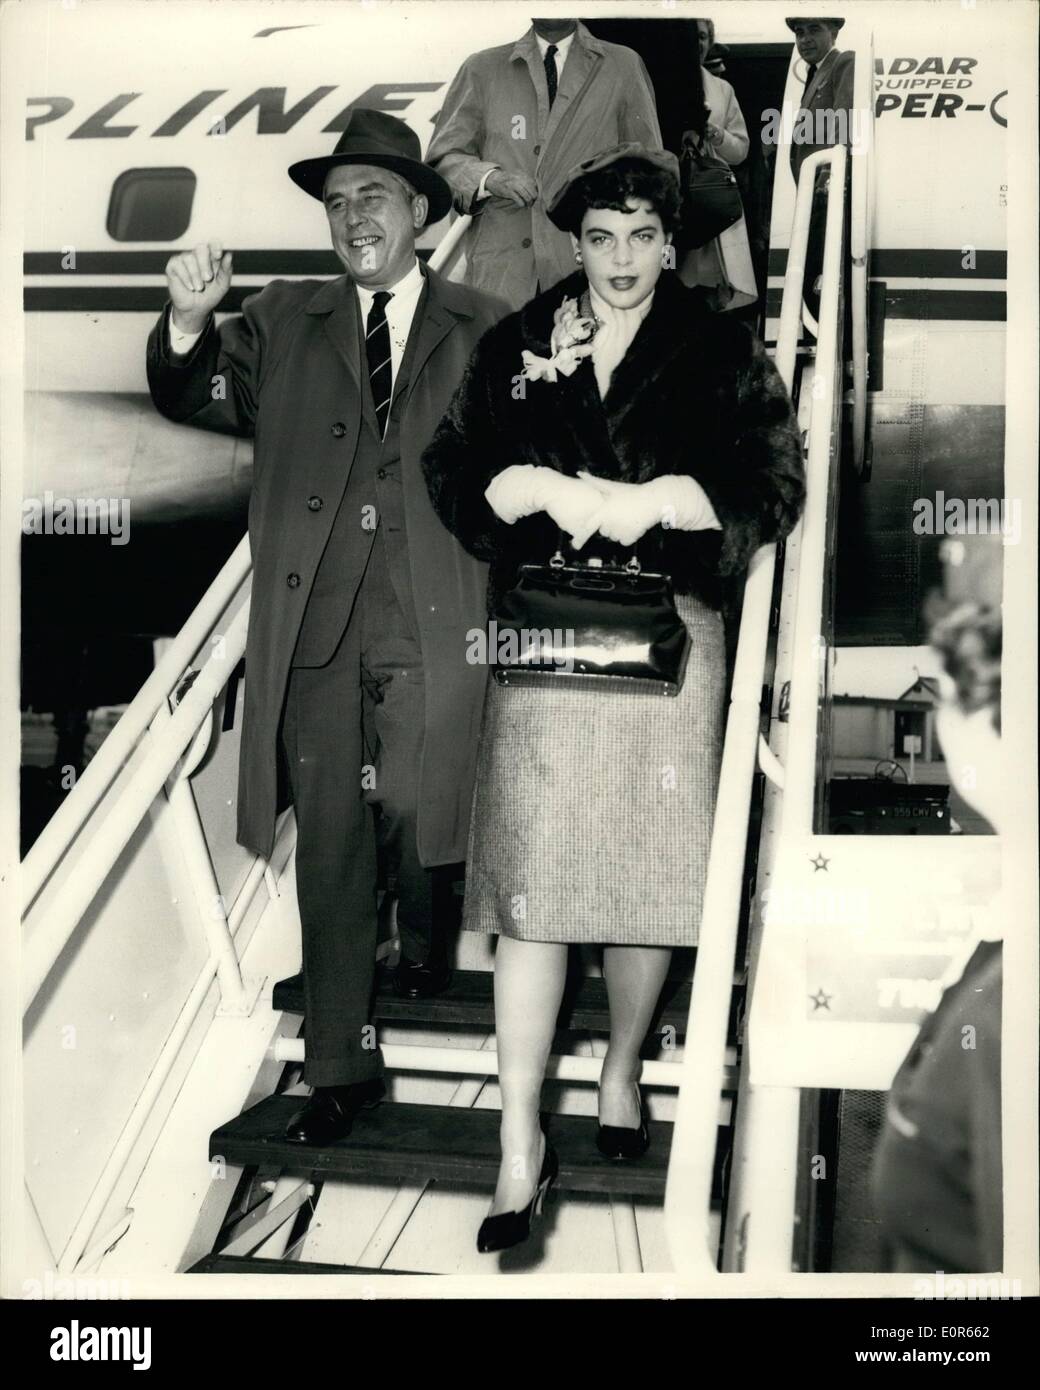 Apr. 04, 1958 - Governor of the New Jersey arrives: the Hon. Robert B. Meyner, Governor of the State of New Jersey, arrived at London Airport from America today. He is visiting England in connection with the opening of the Port of New York Authority's London Trade Development Office. Photo shows Robert B. Meyner and his wife, Helen, pictured leaving the aircraft on arrival at London Airport today. Stock Photo